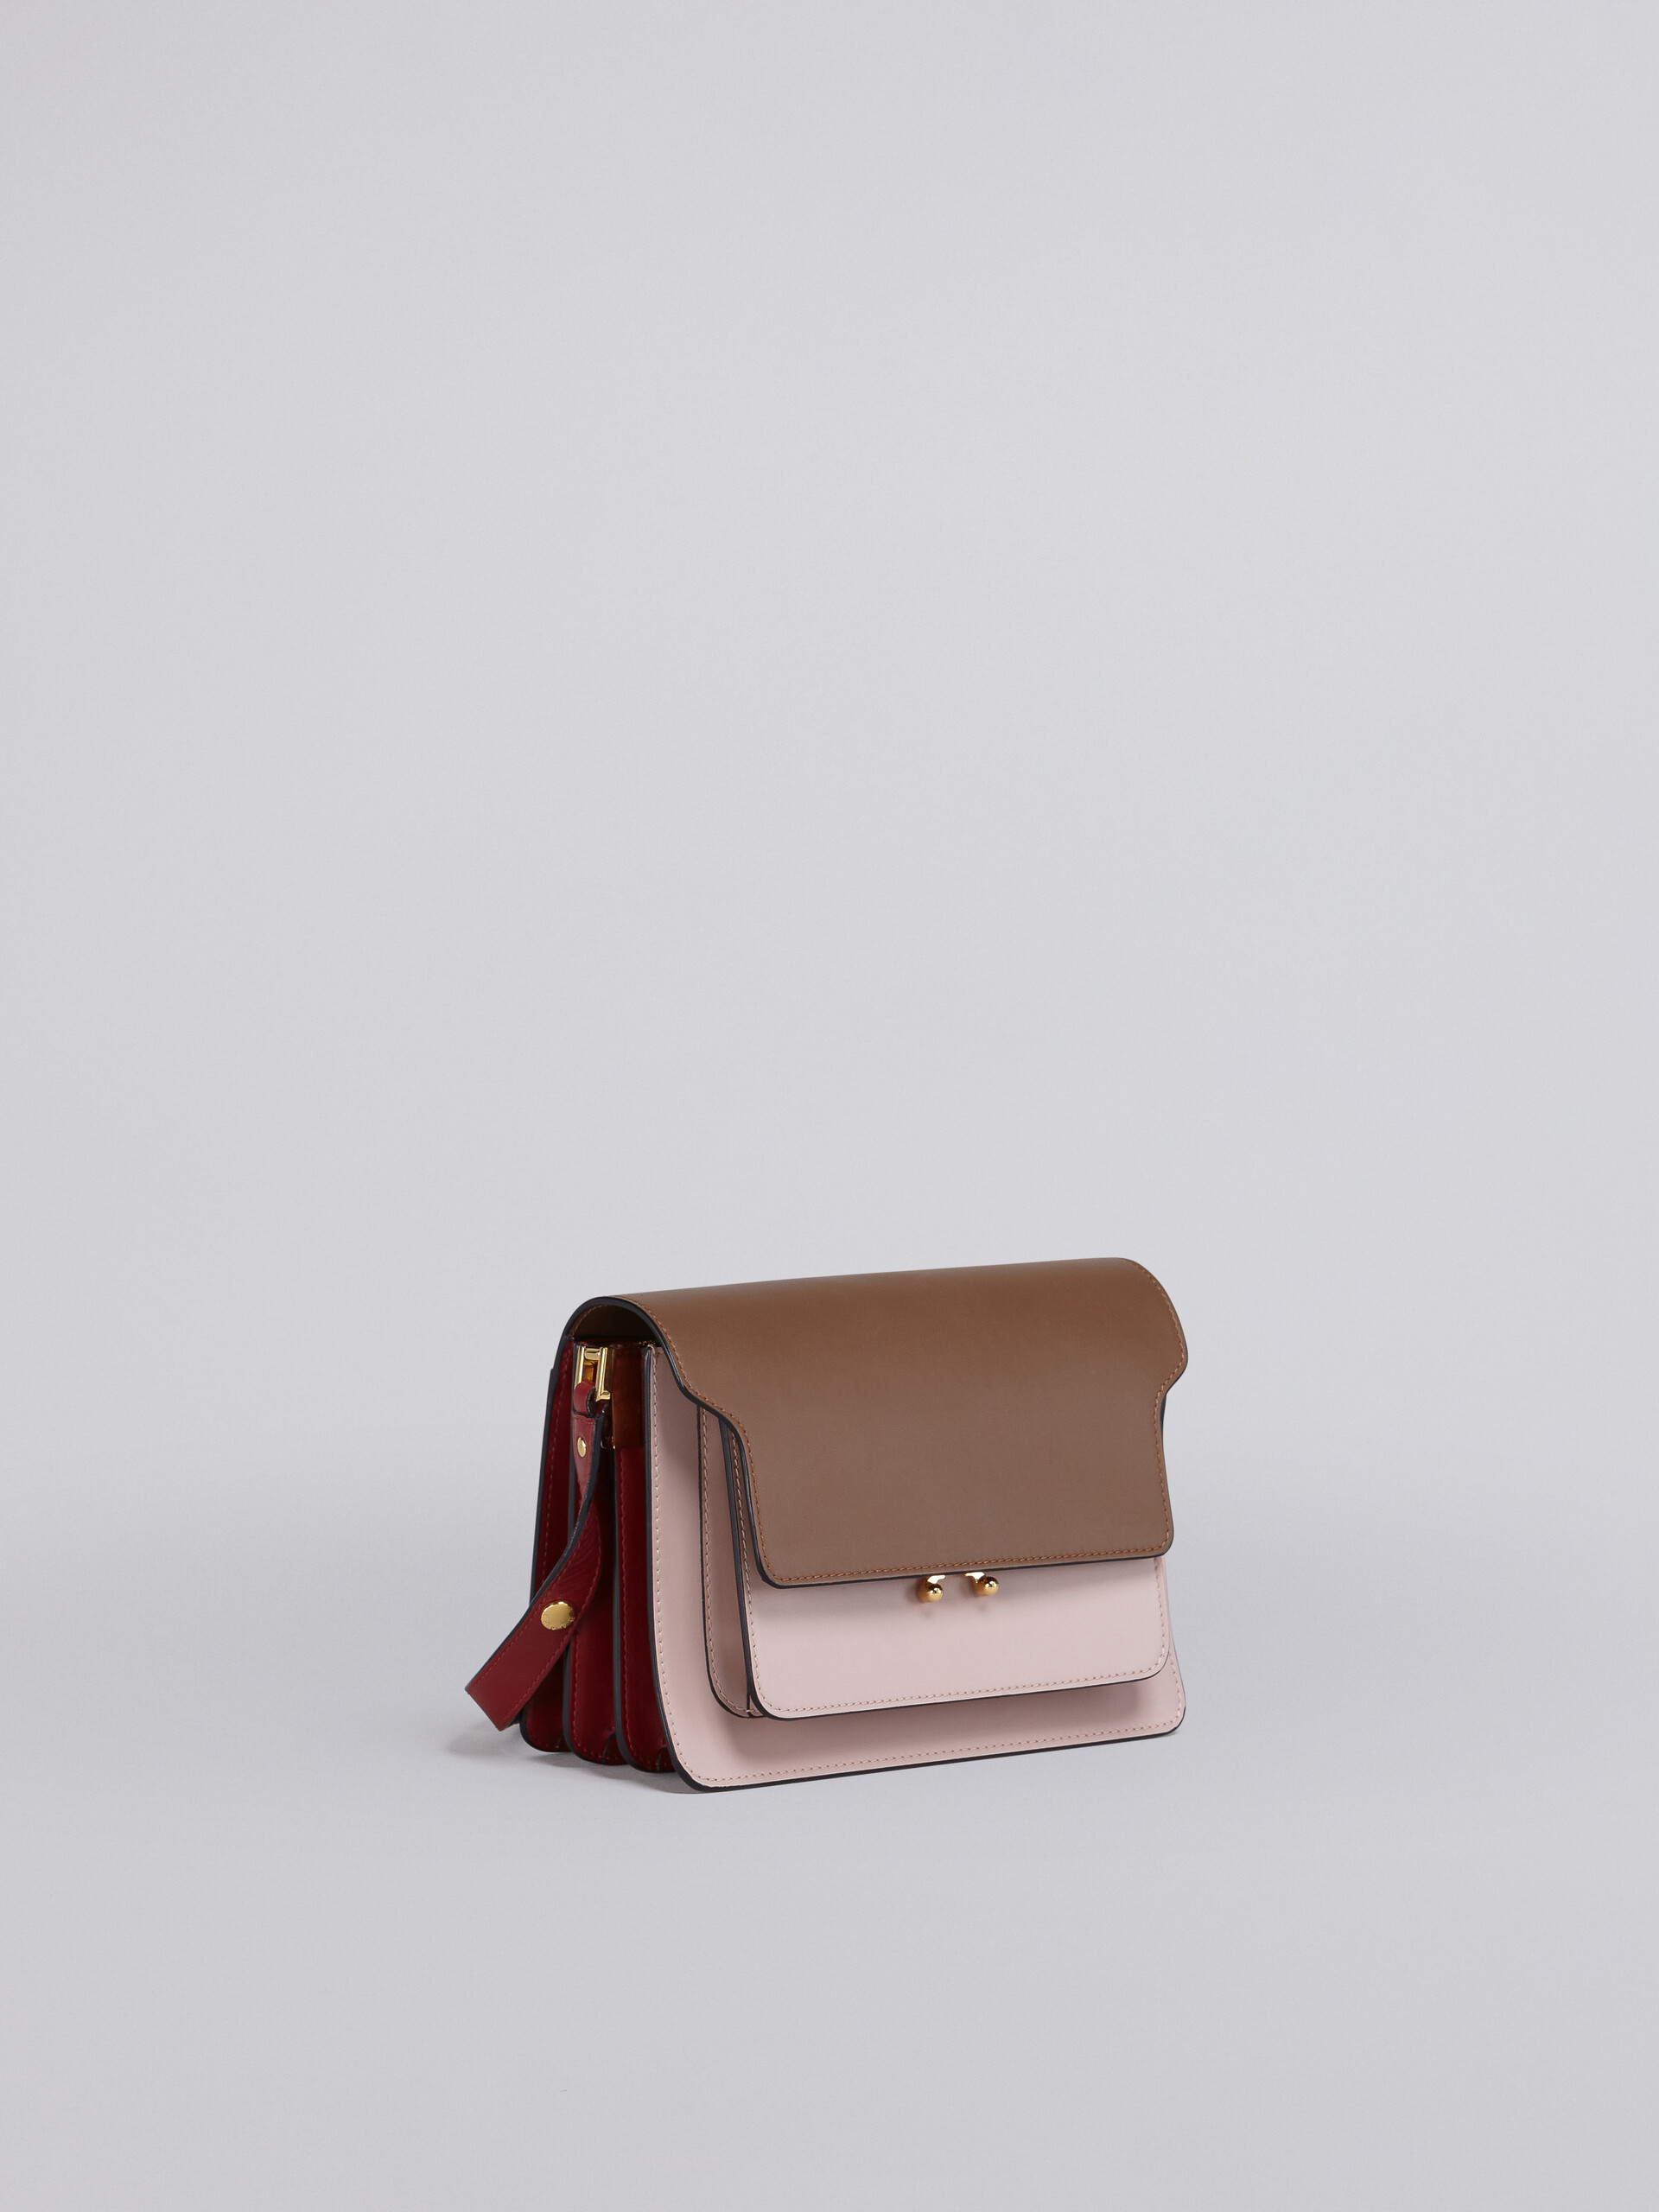 TRUNK medium bag in brown pink and red leather